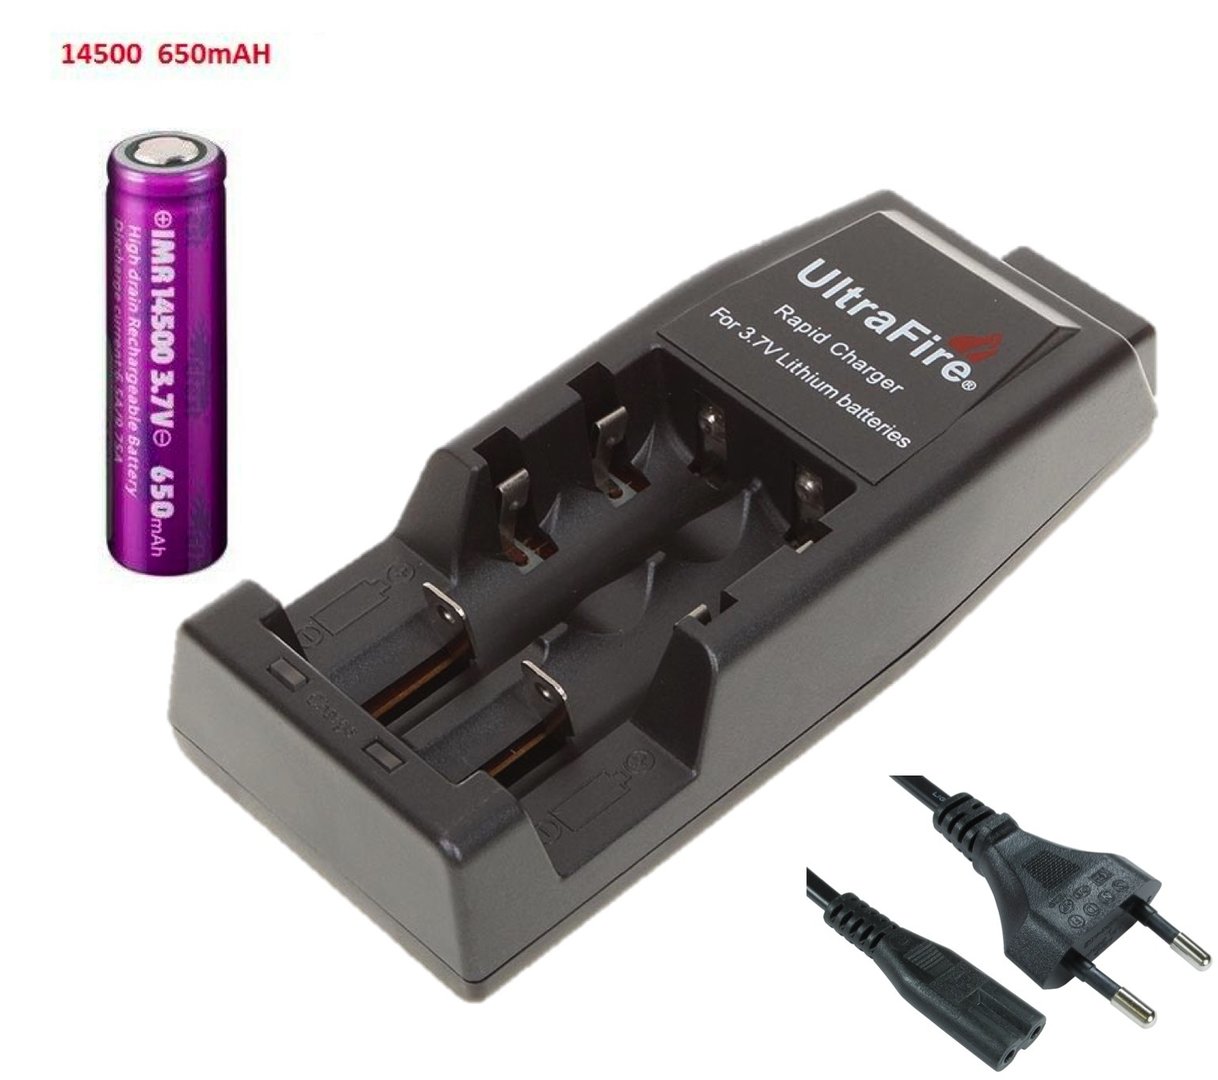 Ultrafire WF-139 Multifunctional Battery Charger 2-Pin Lead with 1 x EFEST 14500 Battery B